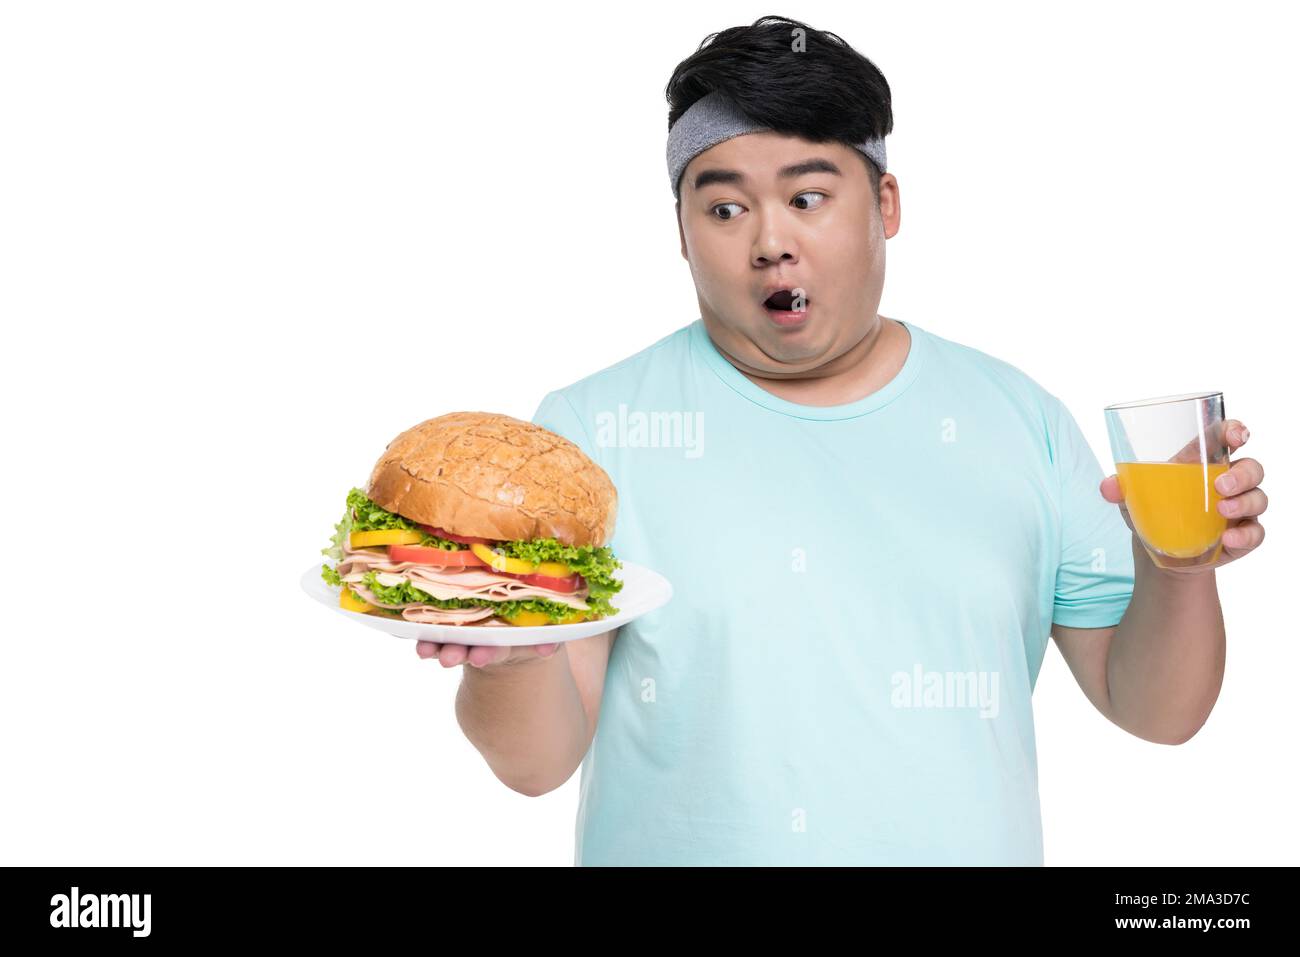 Fat young man holding a hamburger and drinks Stock Photo